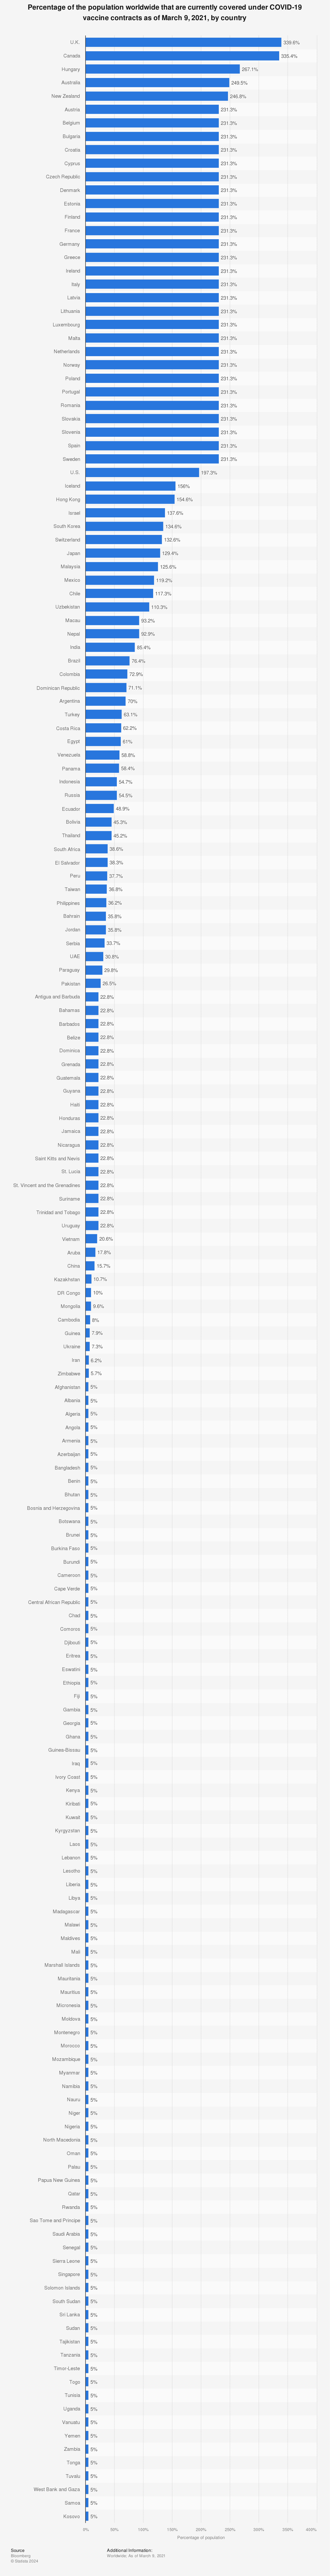 Statistic: Percentage of the population worldwide that are currently covered under COVID-19 vaccine contracts as of March 9, 2021, by country | Statista